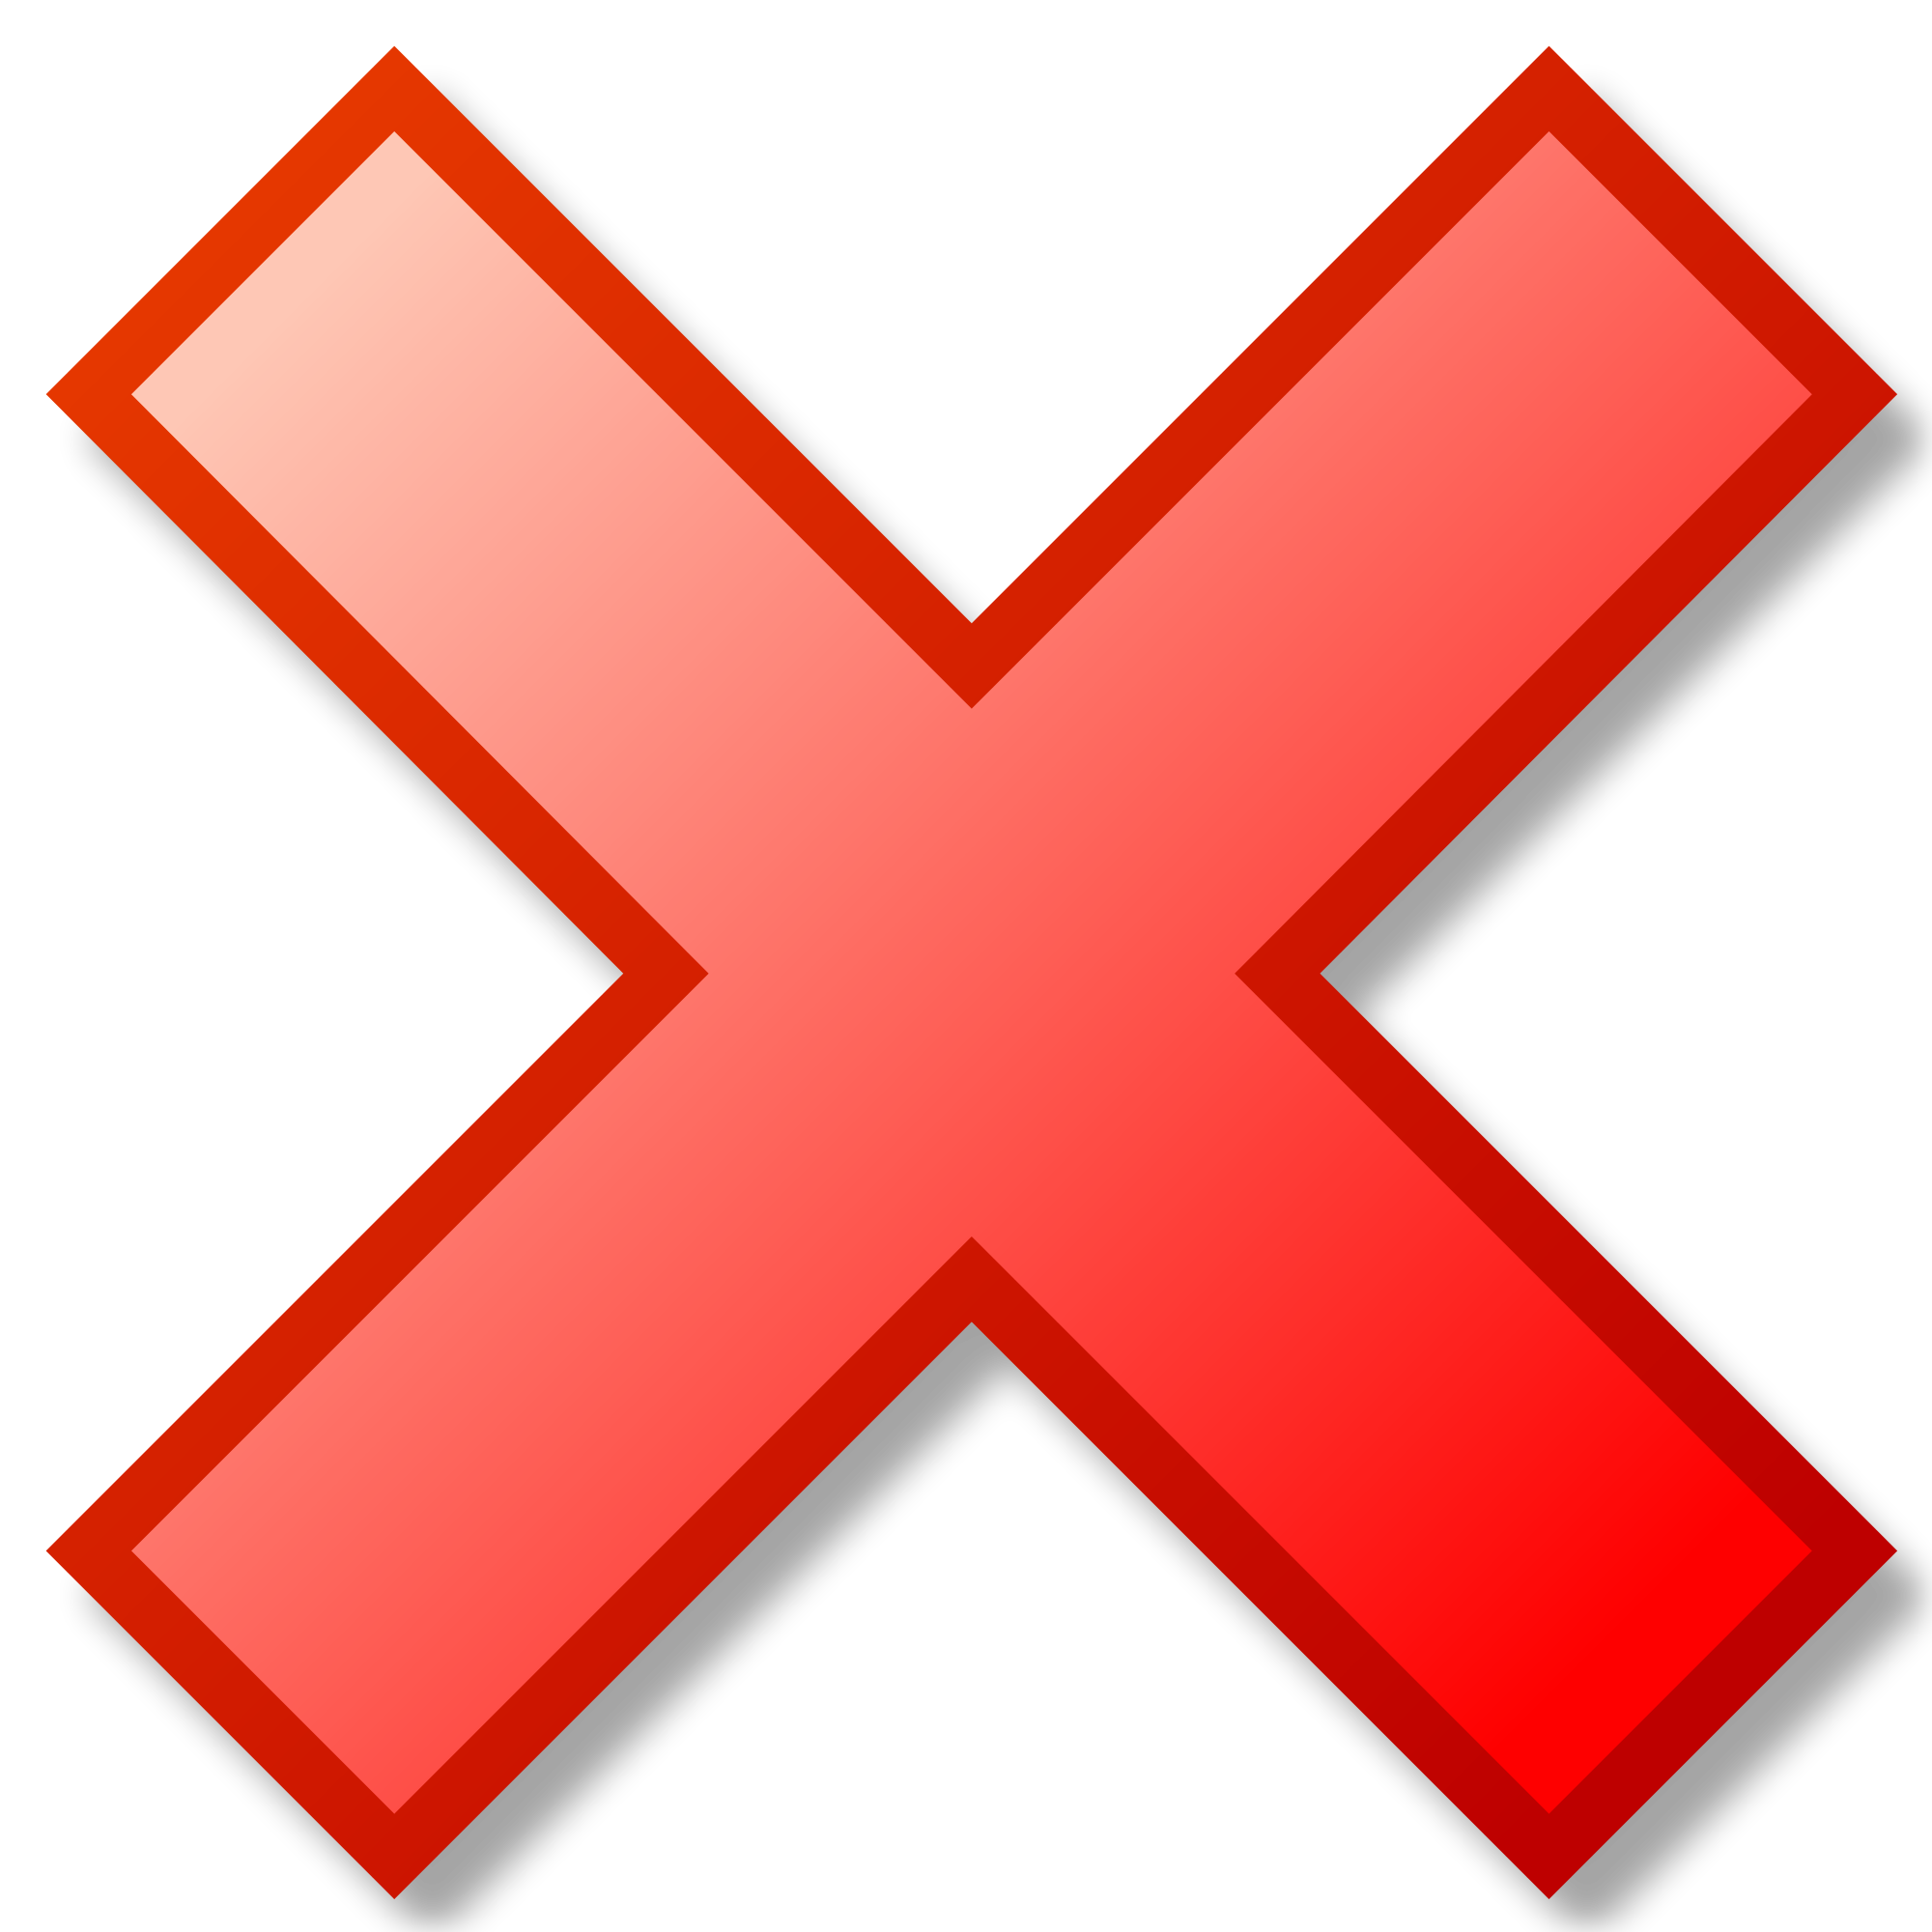 cancel image png